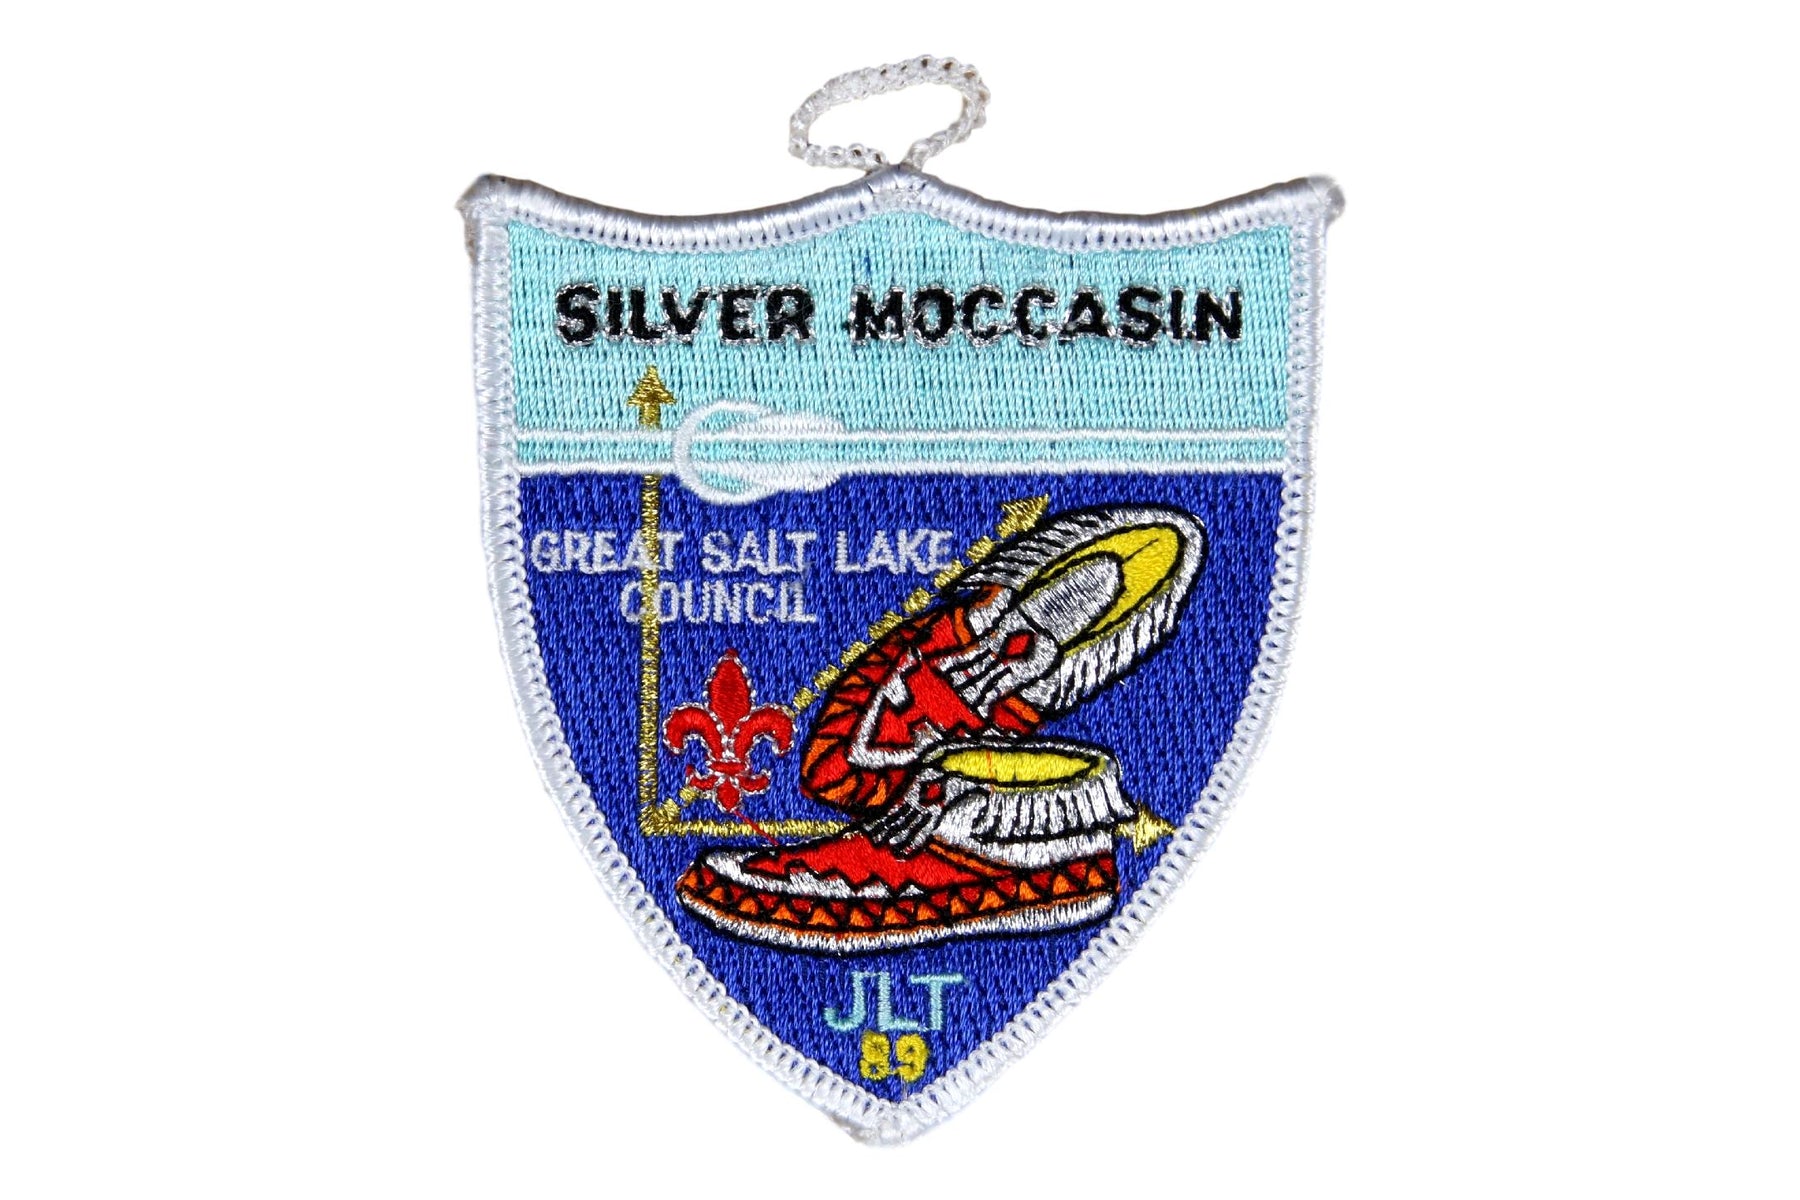 1989 Great Salt Lake Silver Moccasin Patch